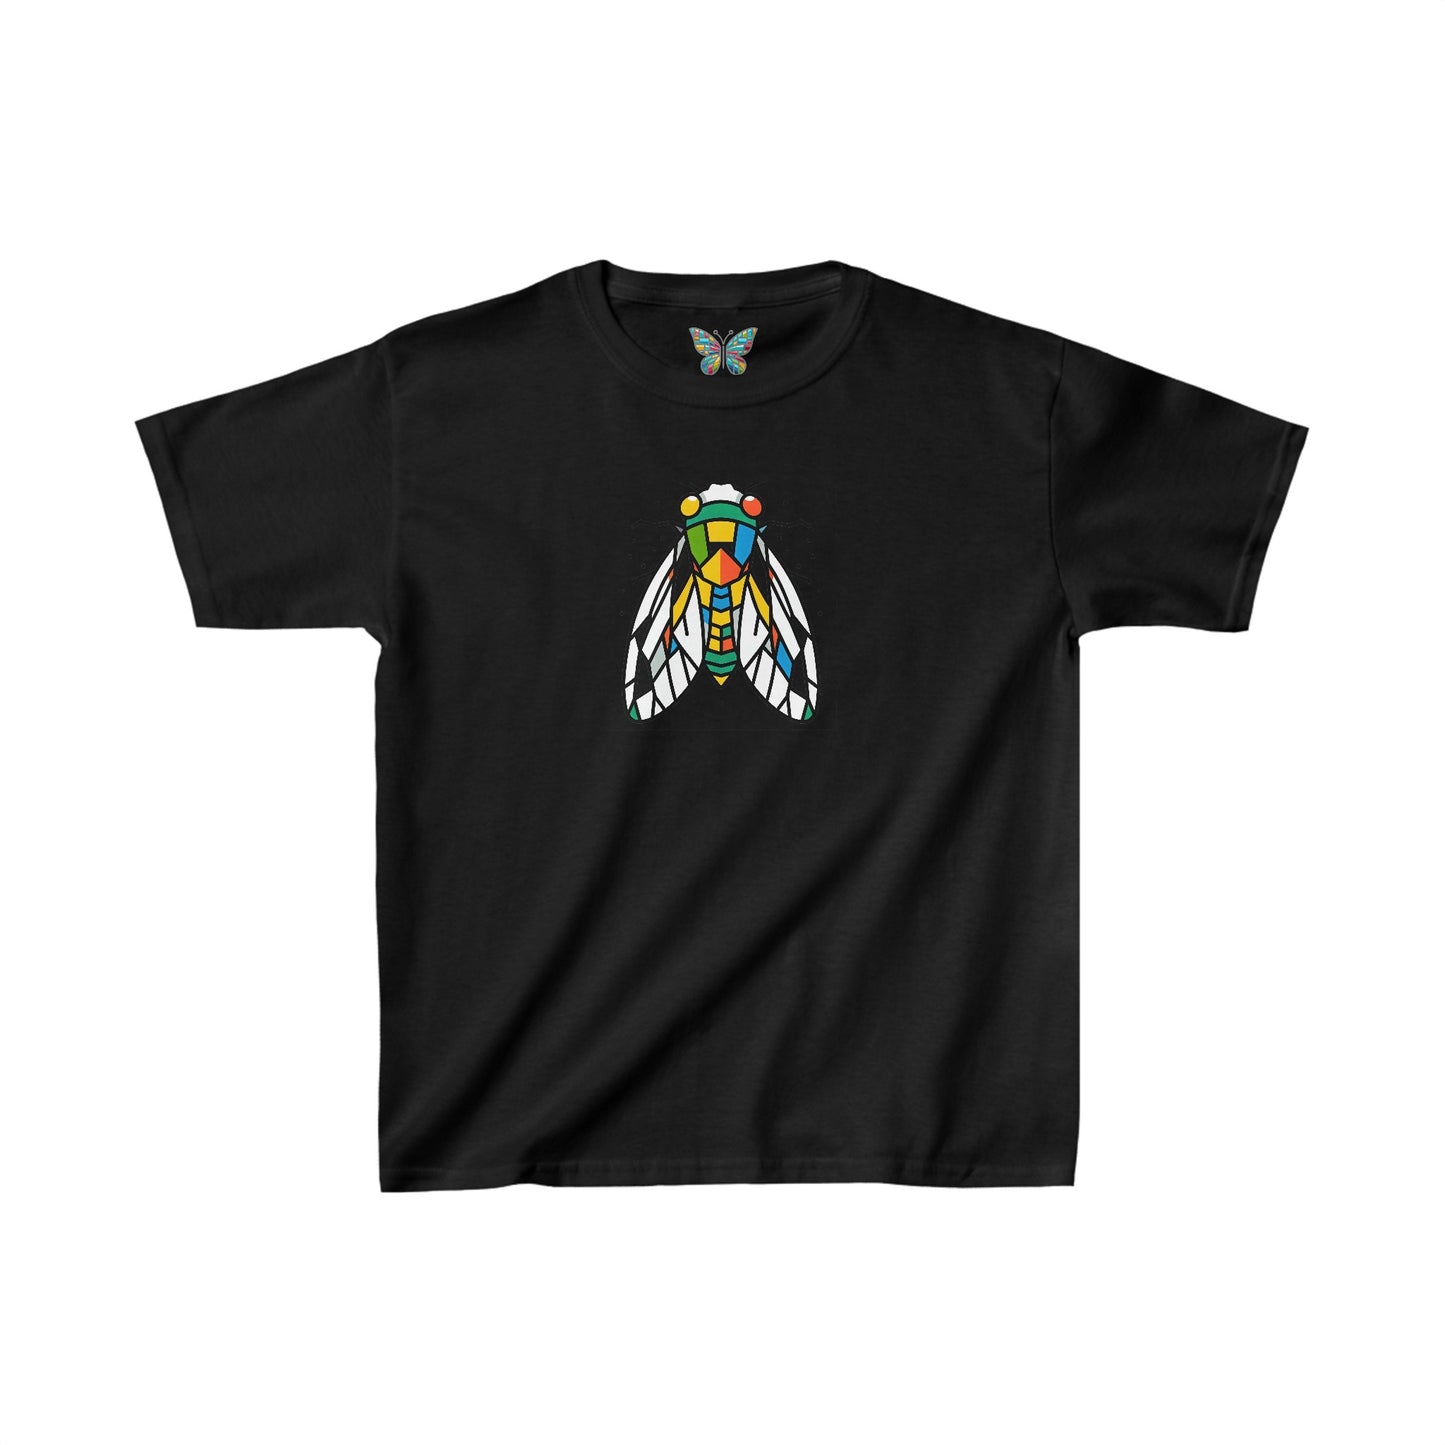 Cicada Colorfest - Youth - Snazzle Tee